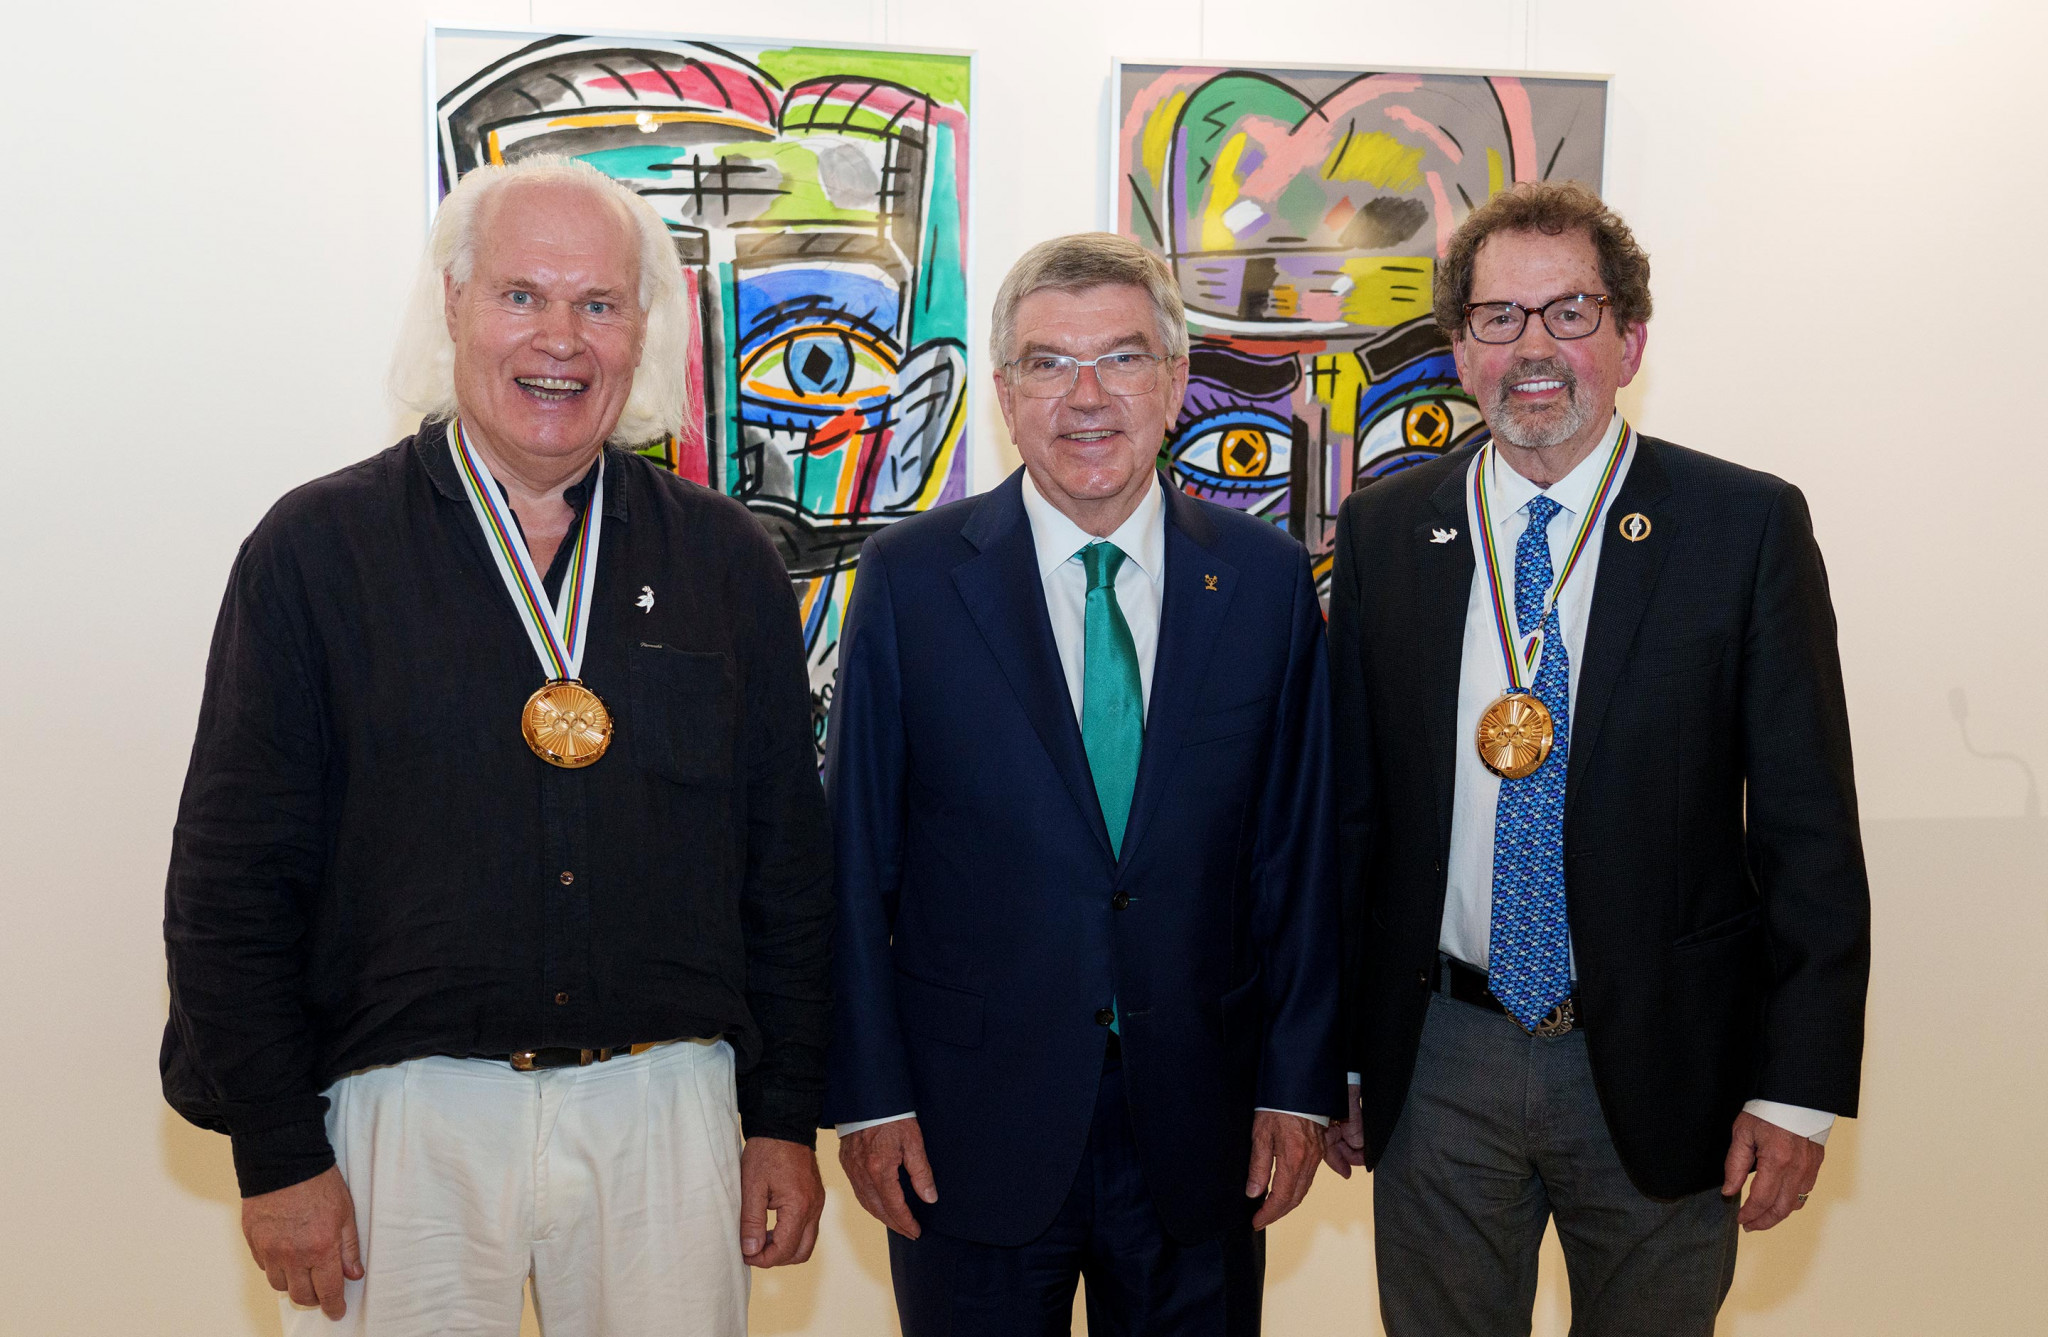 Coubertin Medal presented to artist and writer in ceremony